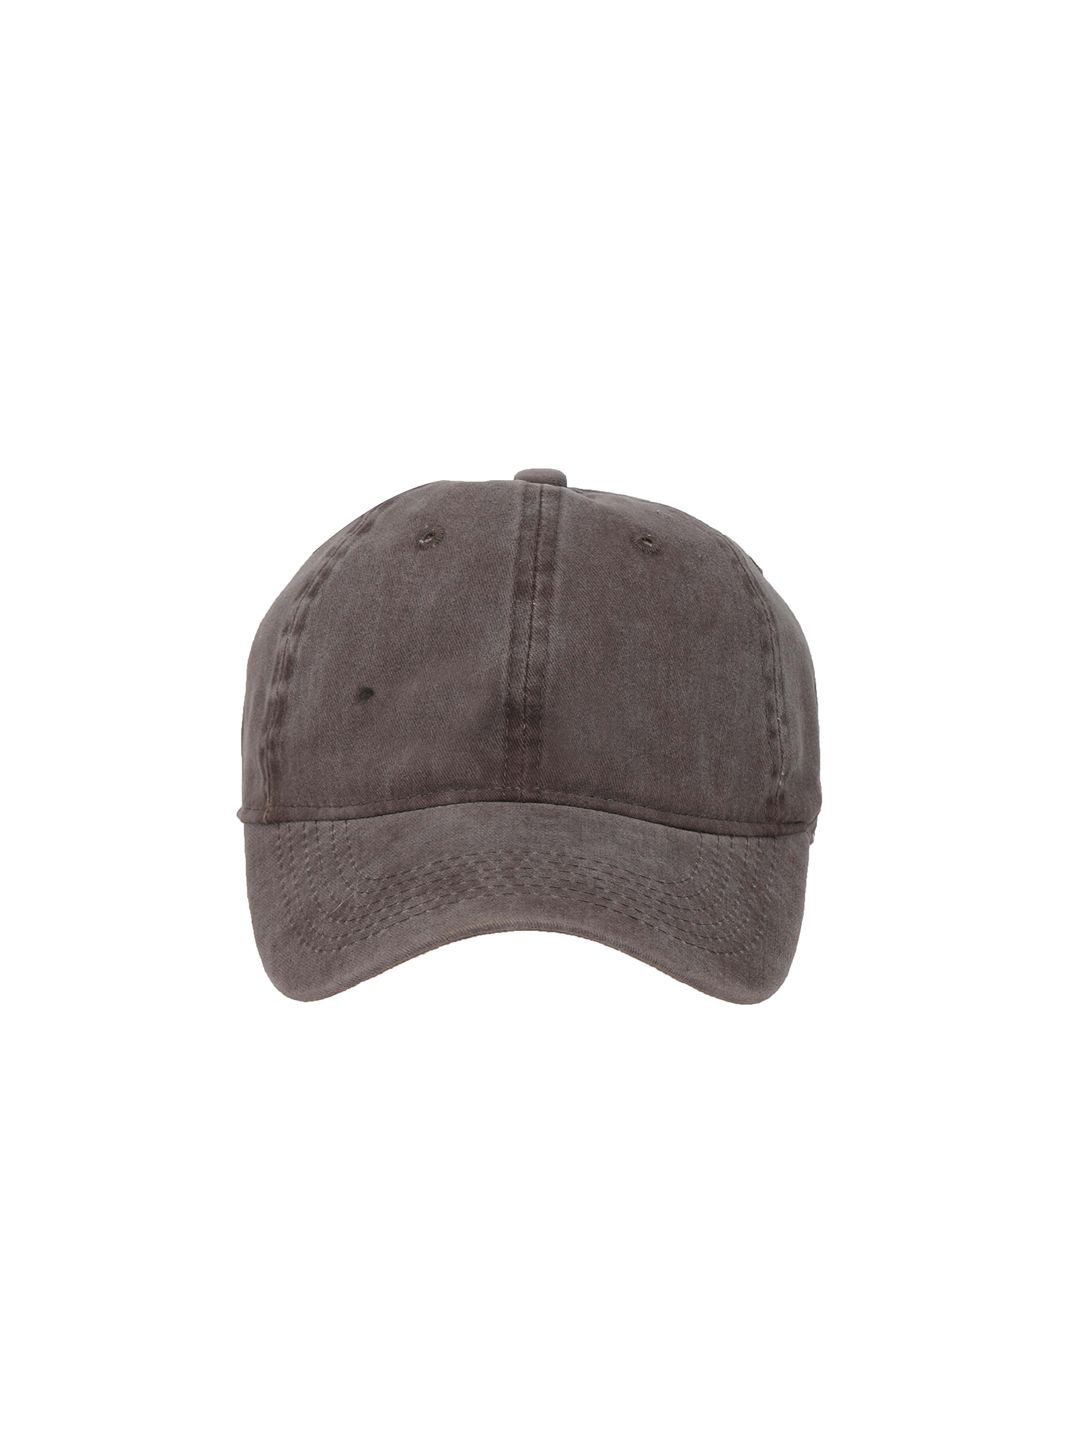 FabSeasons Unisex Brown Solid Baseball Cap Price in India